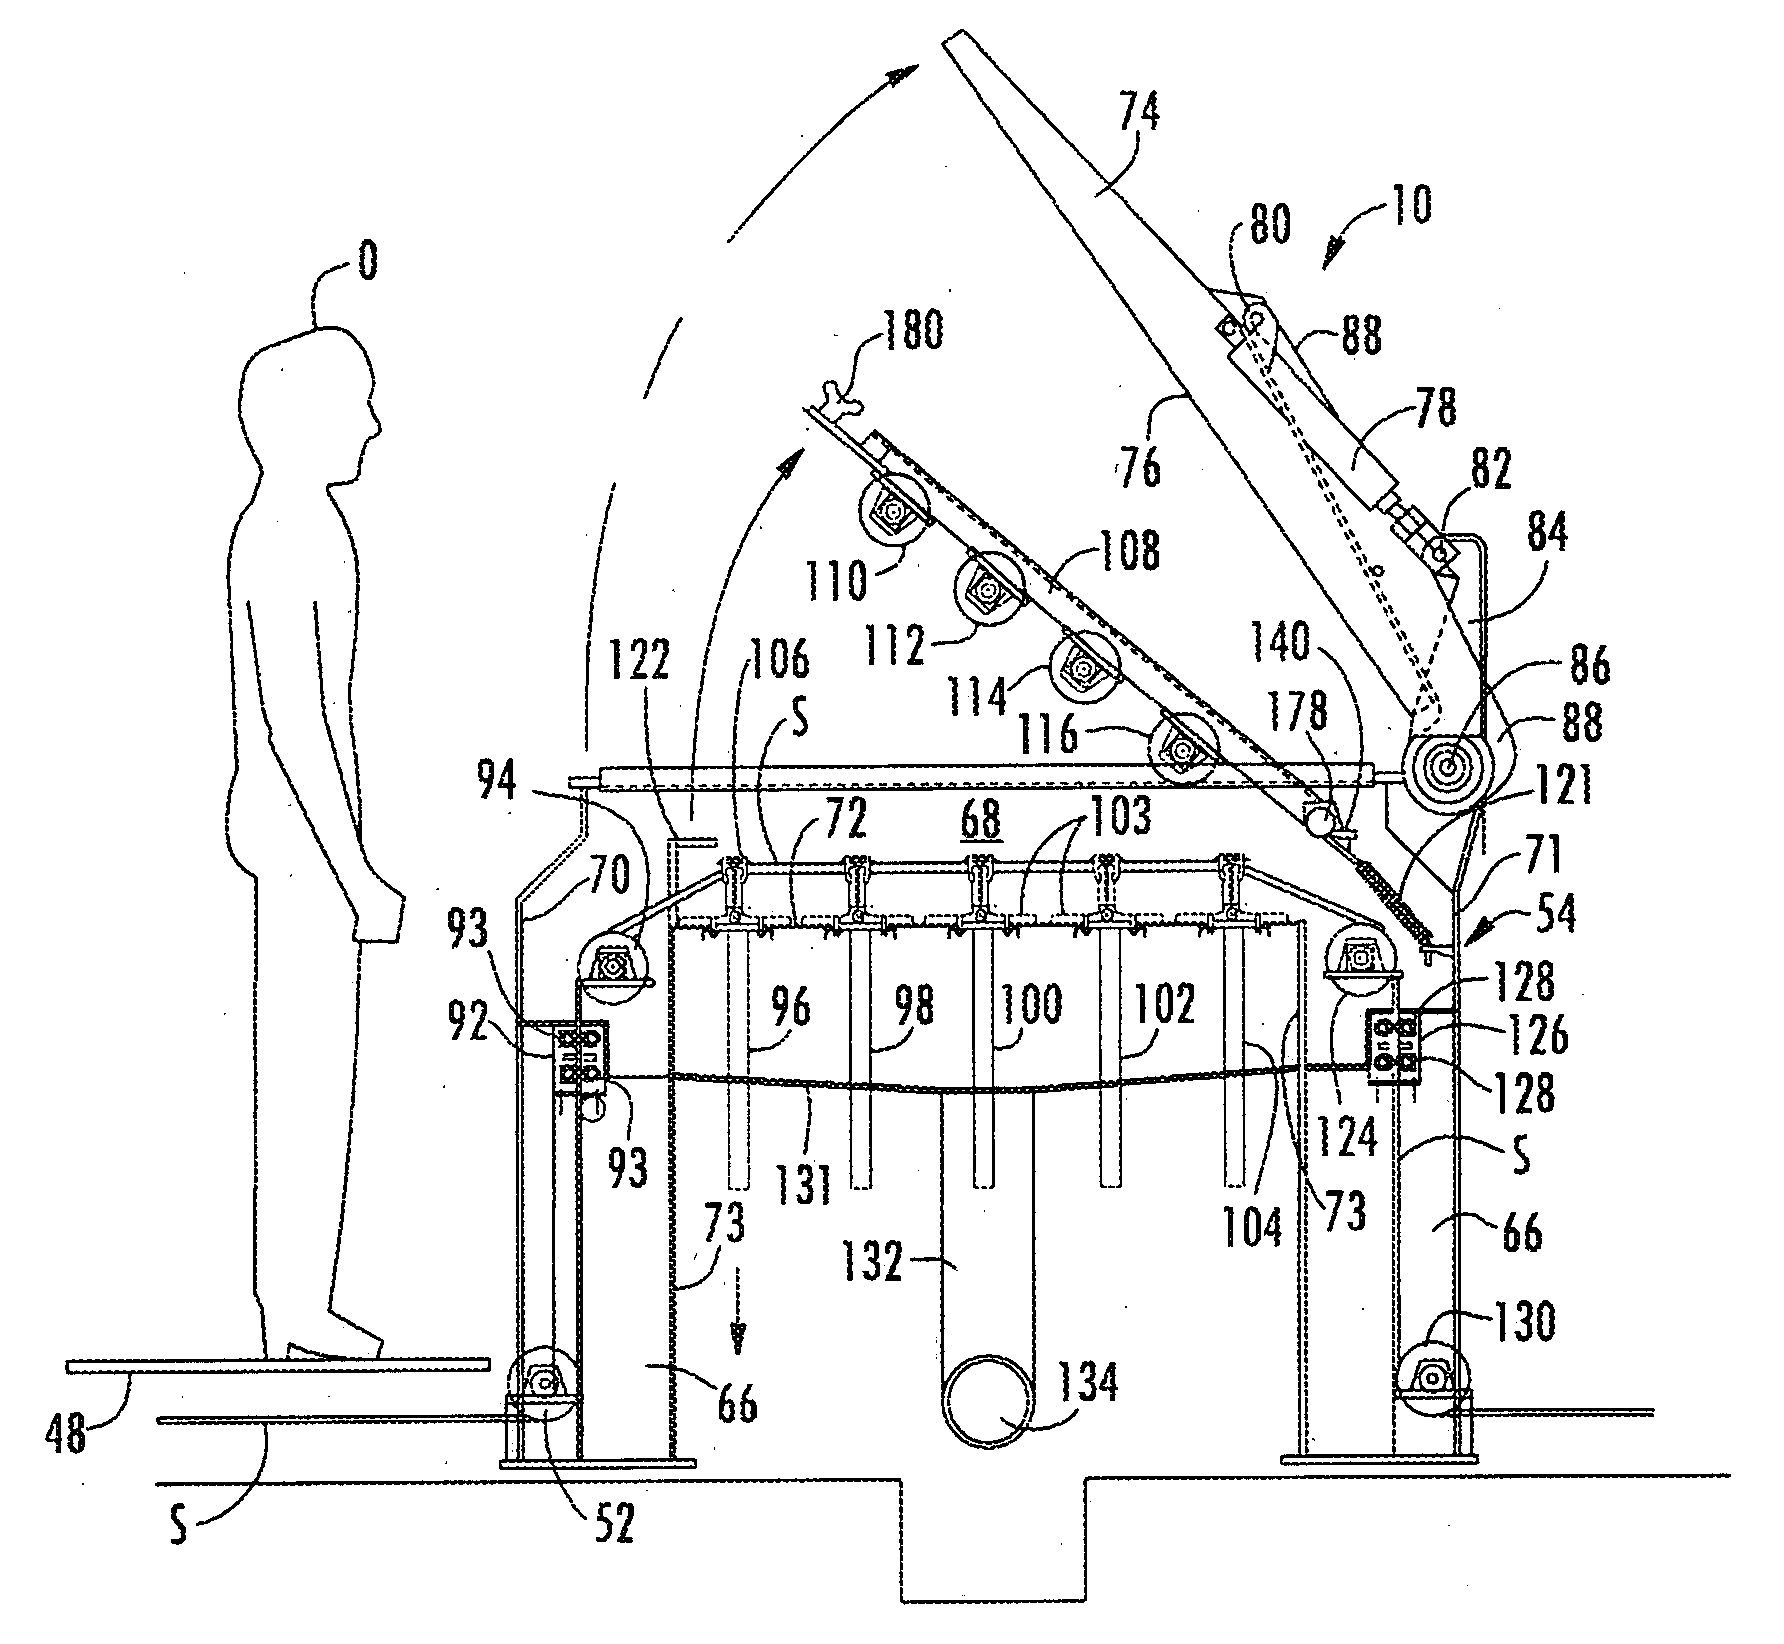 Apparatus for dyeing textile substrates with foamed dye